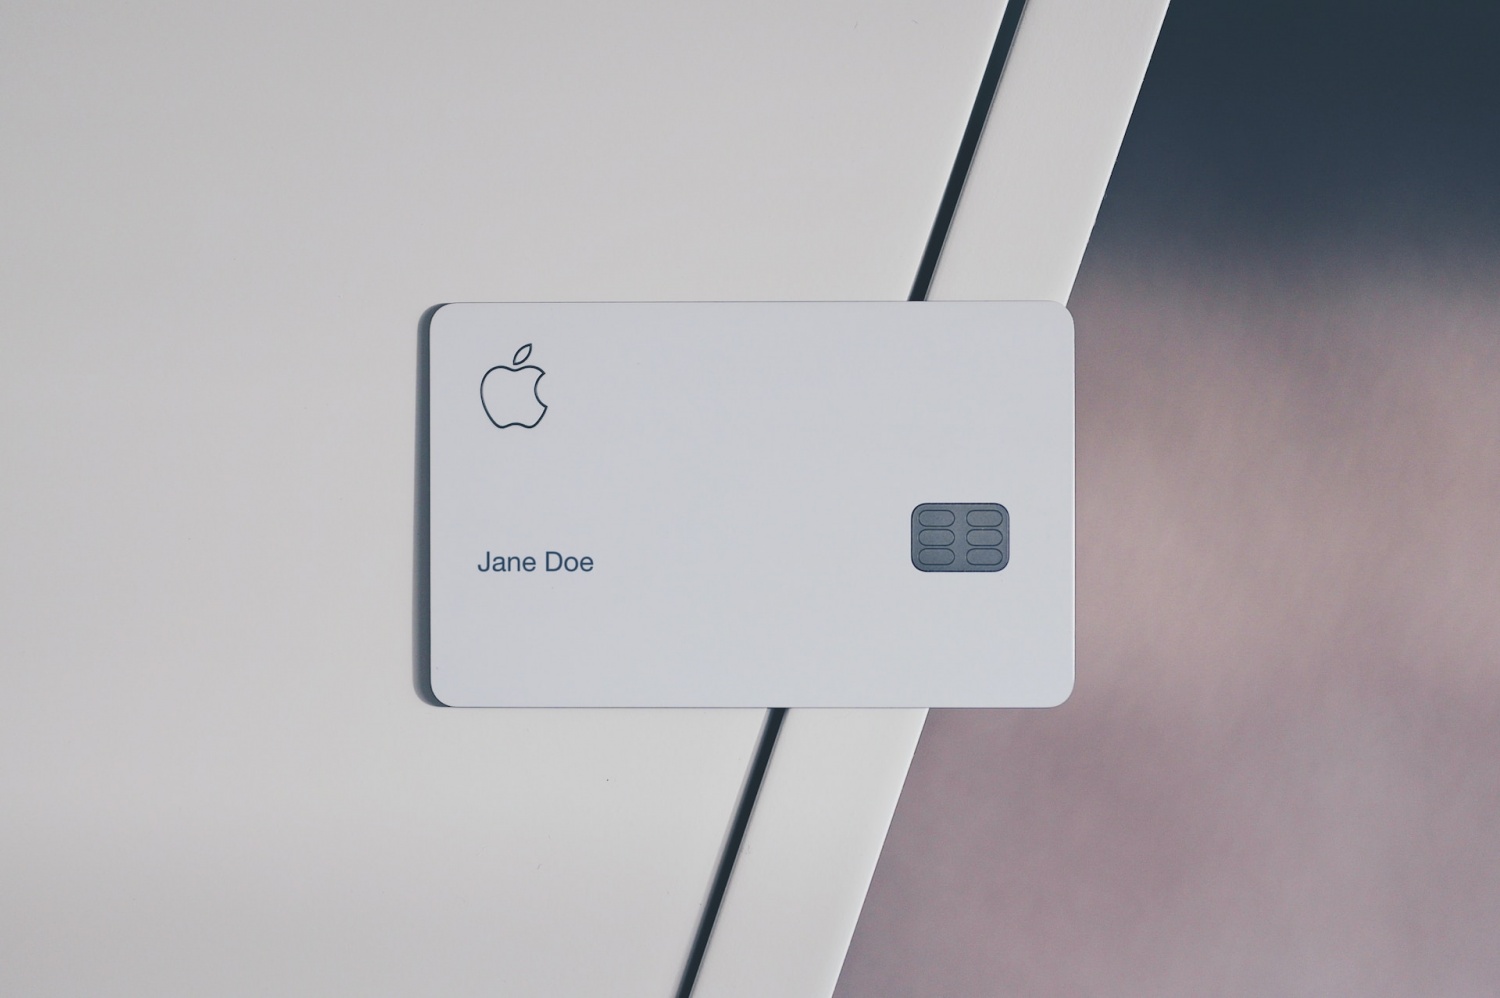 Apple Card Comes with 10% Gas and EV Charging Daily Cash Back Rewards